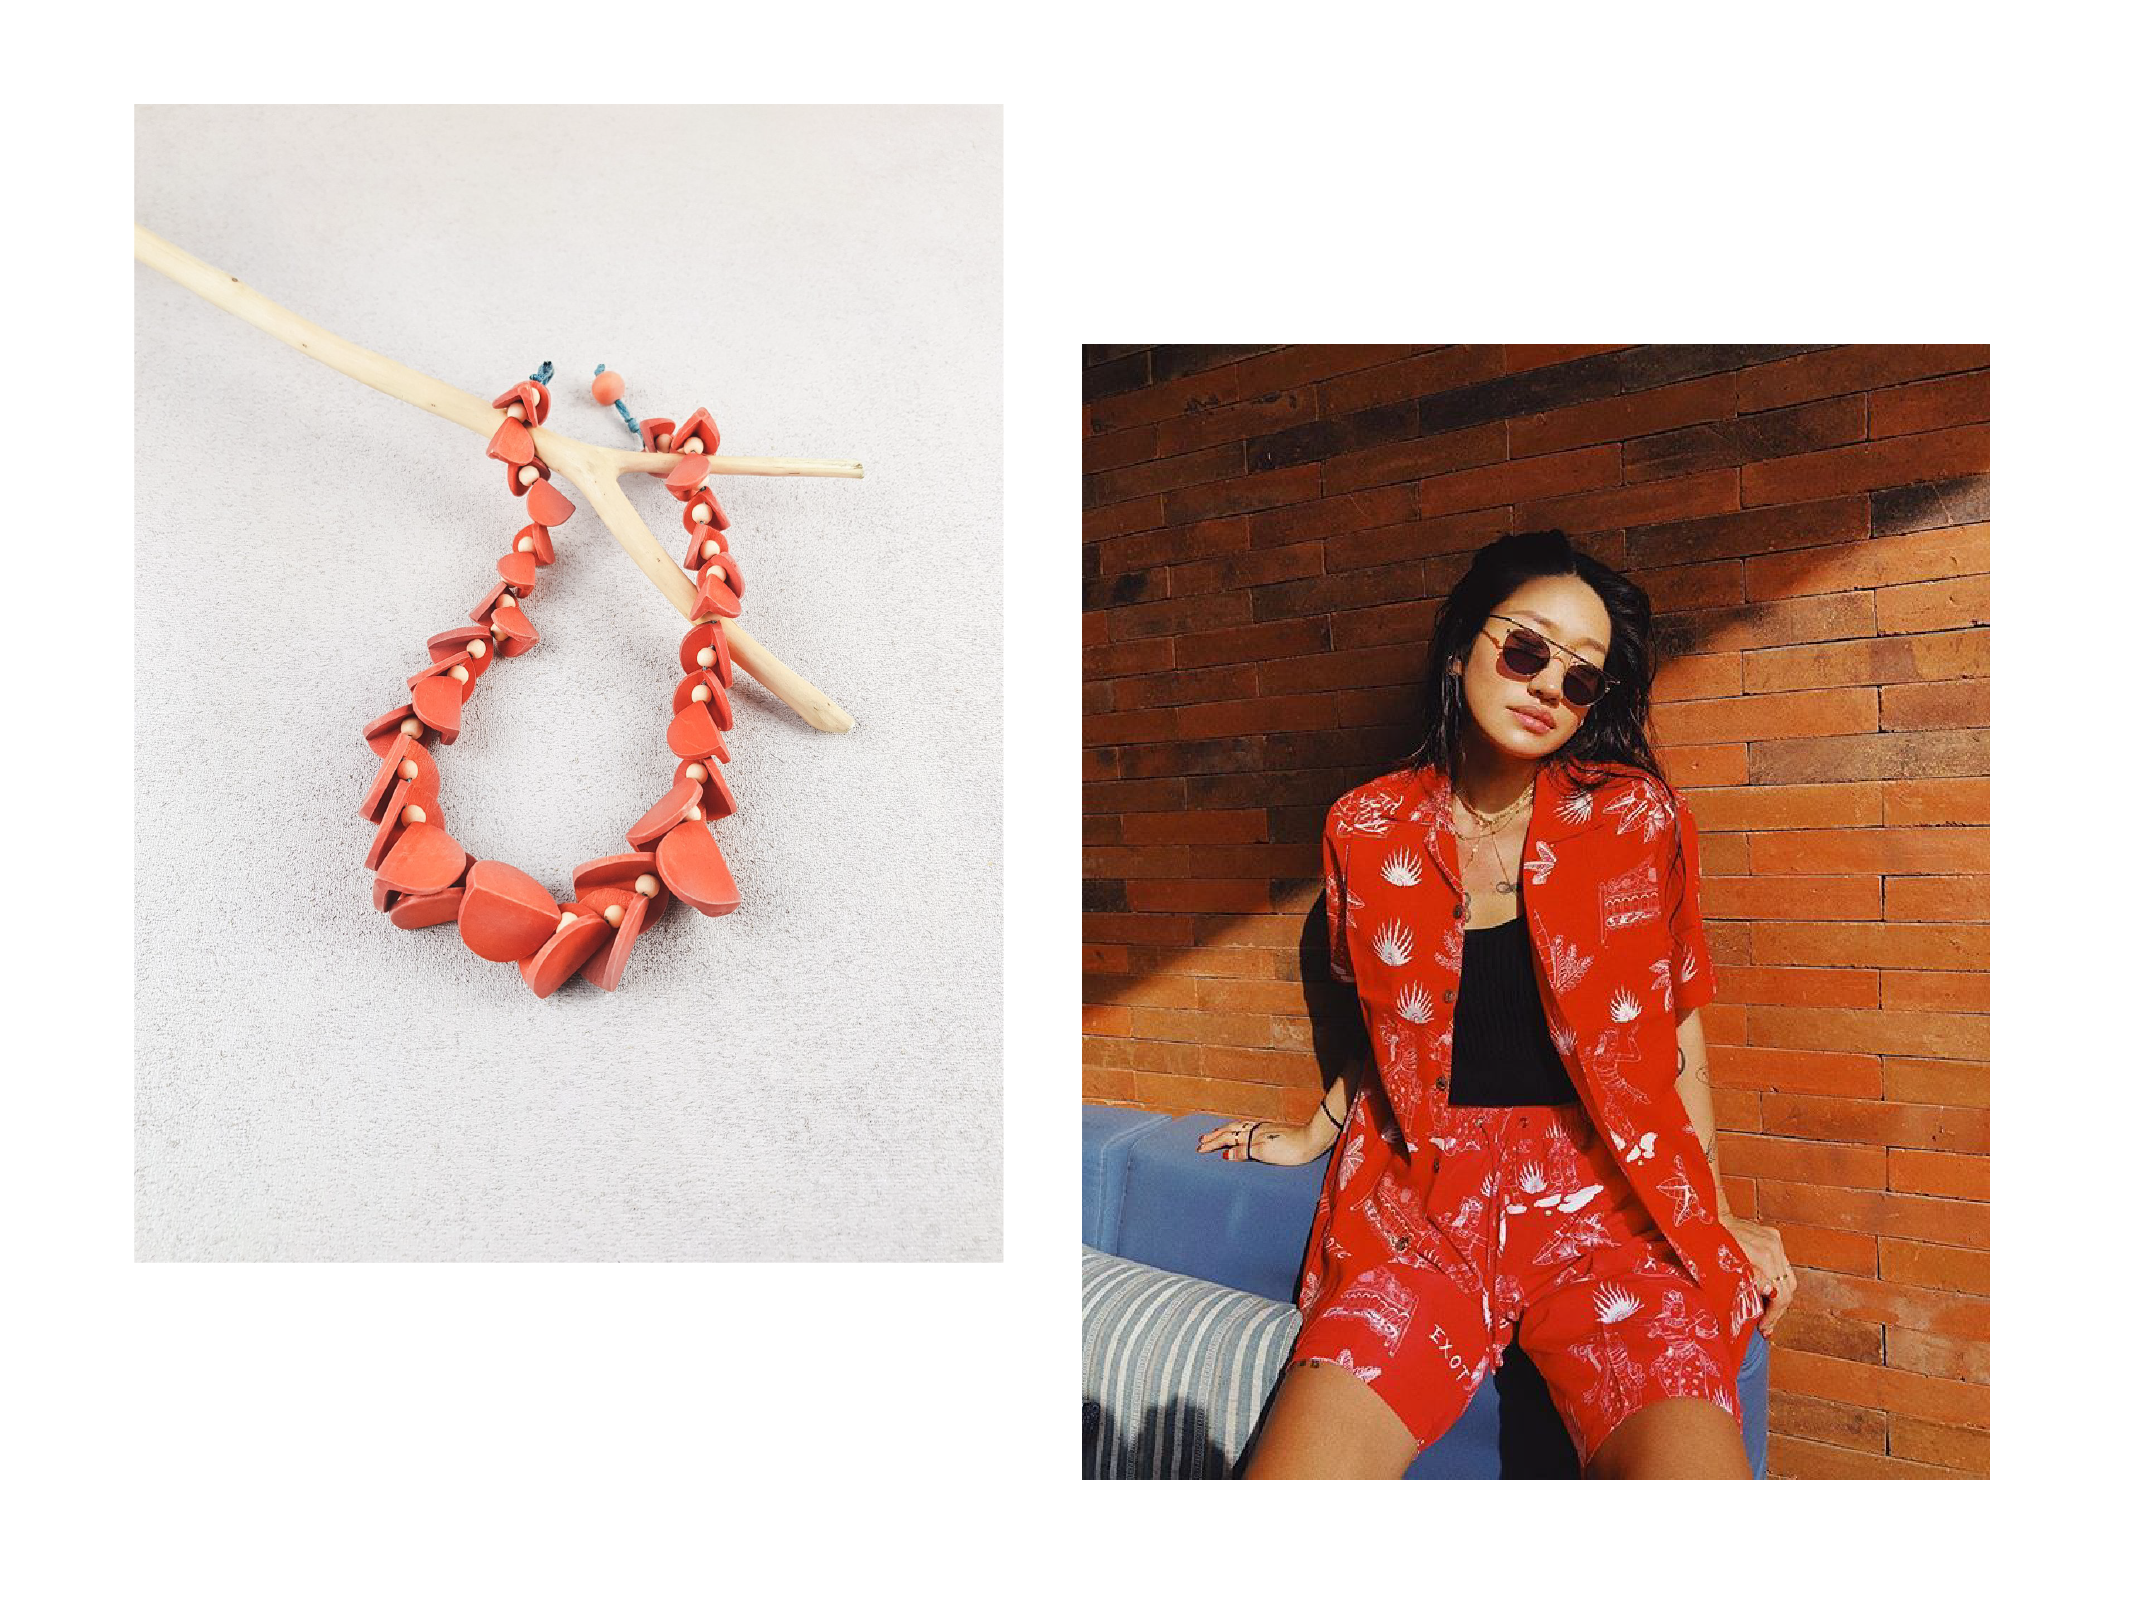 Peggy gou wearing red terno set with moy wooden necklace